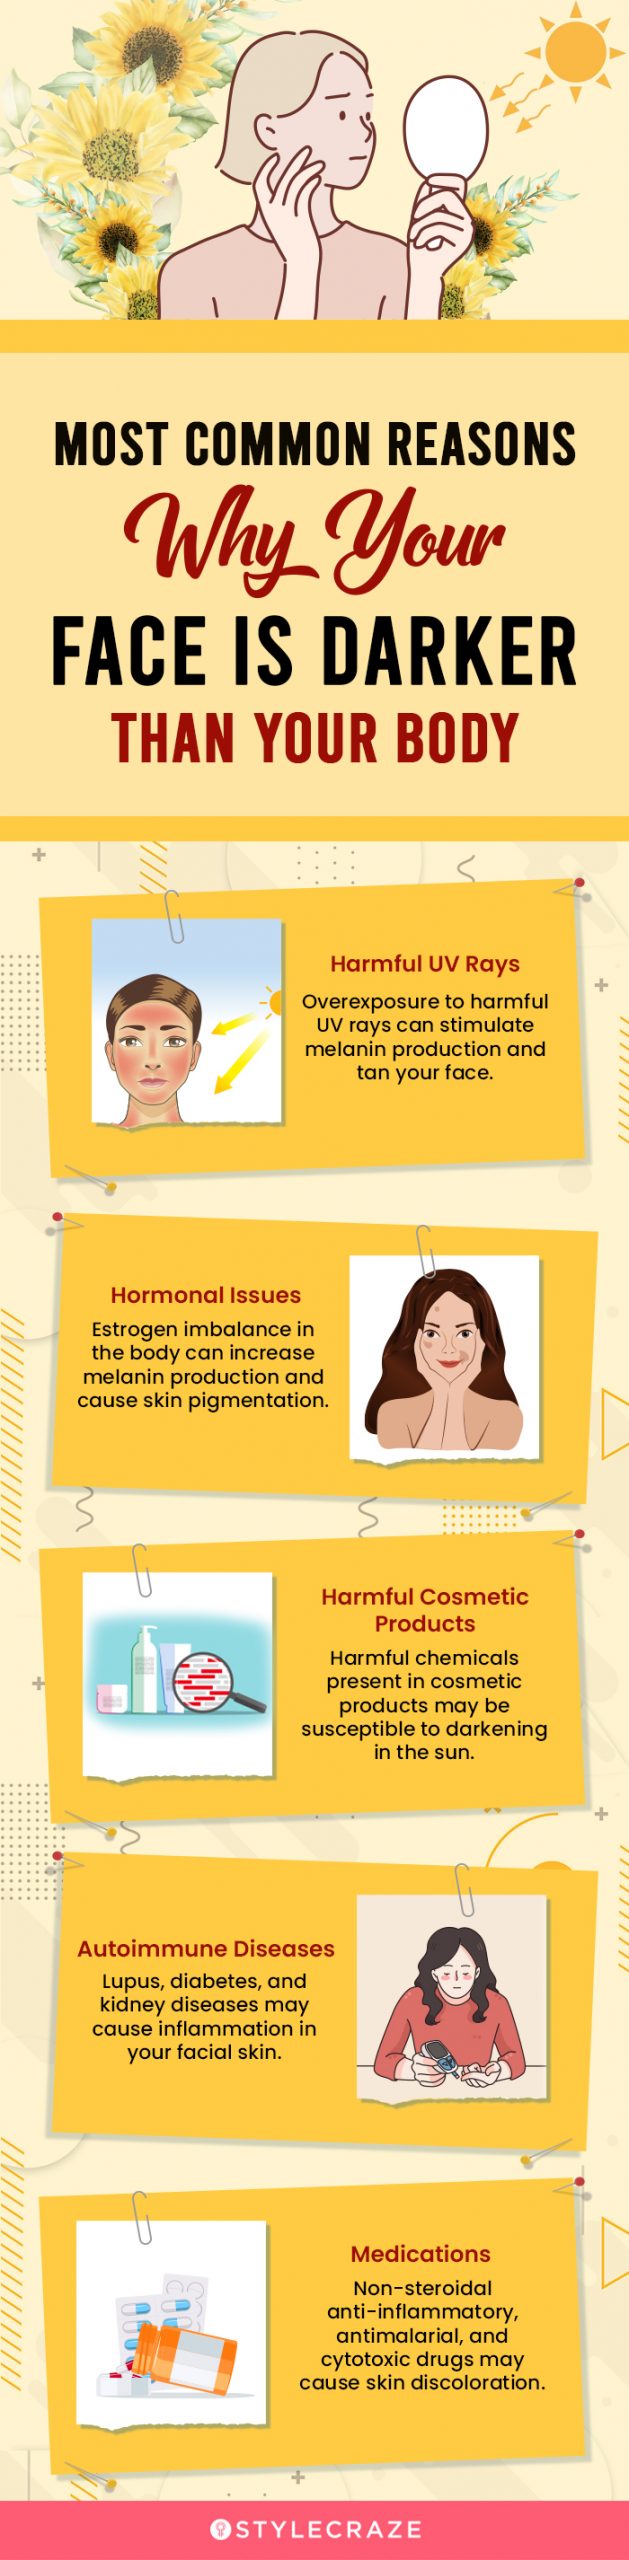 most common reasons why your face is darker than your body (infographic)